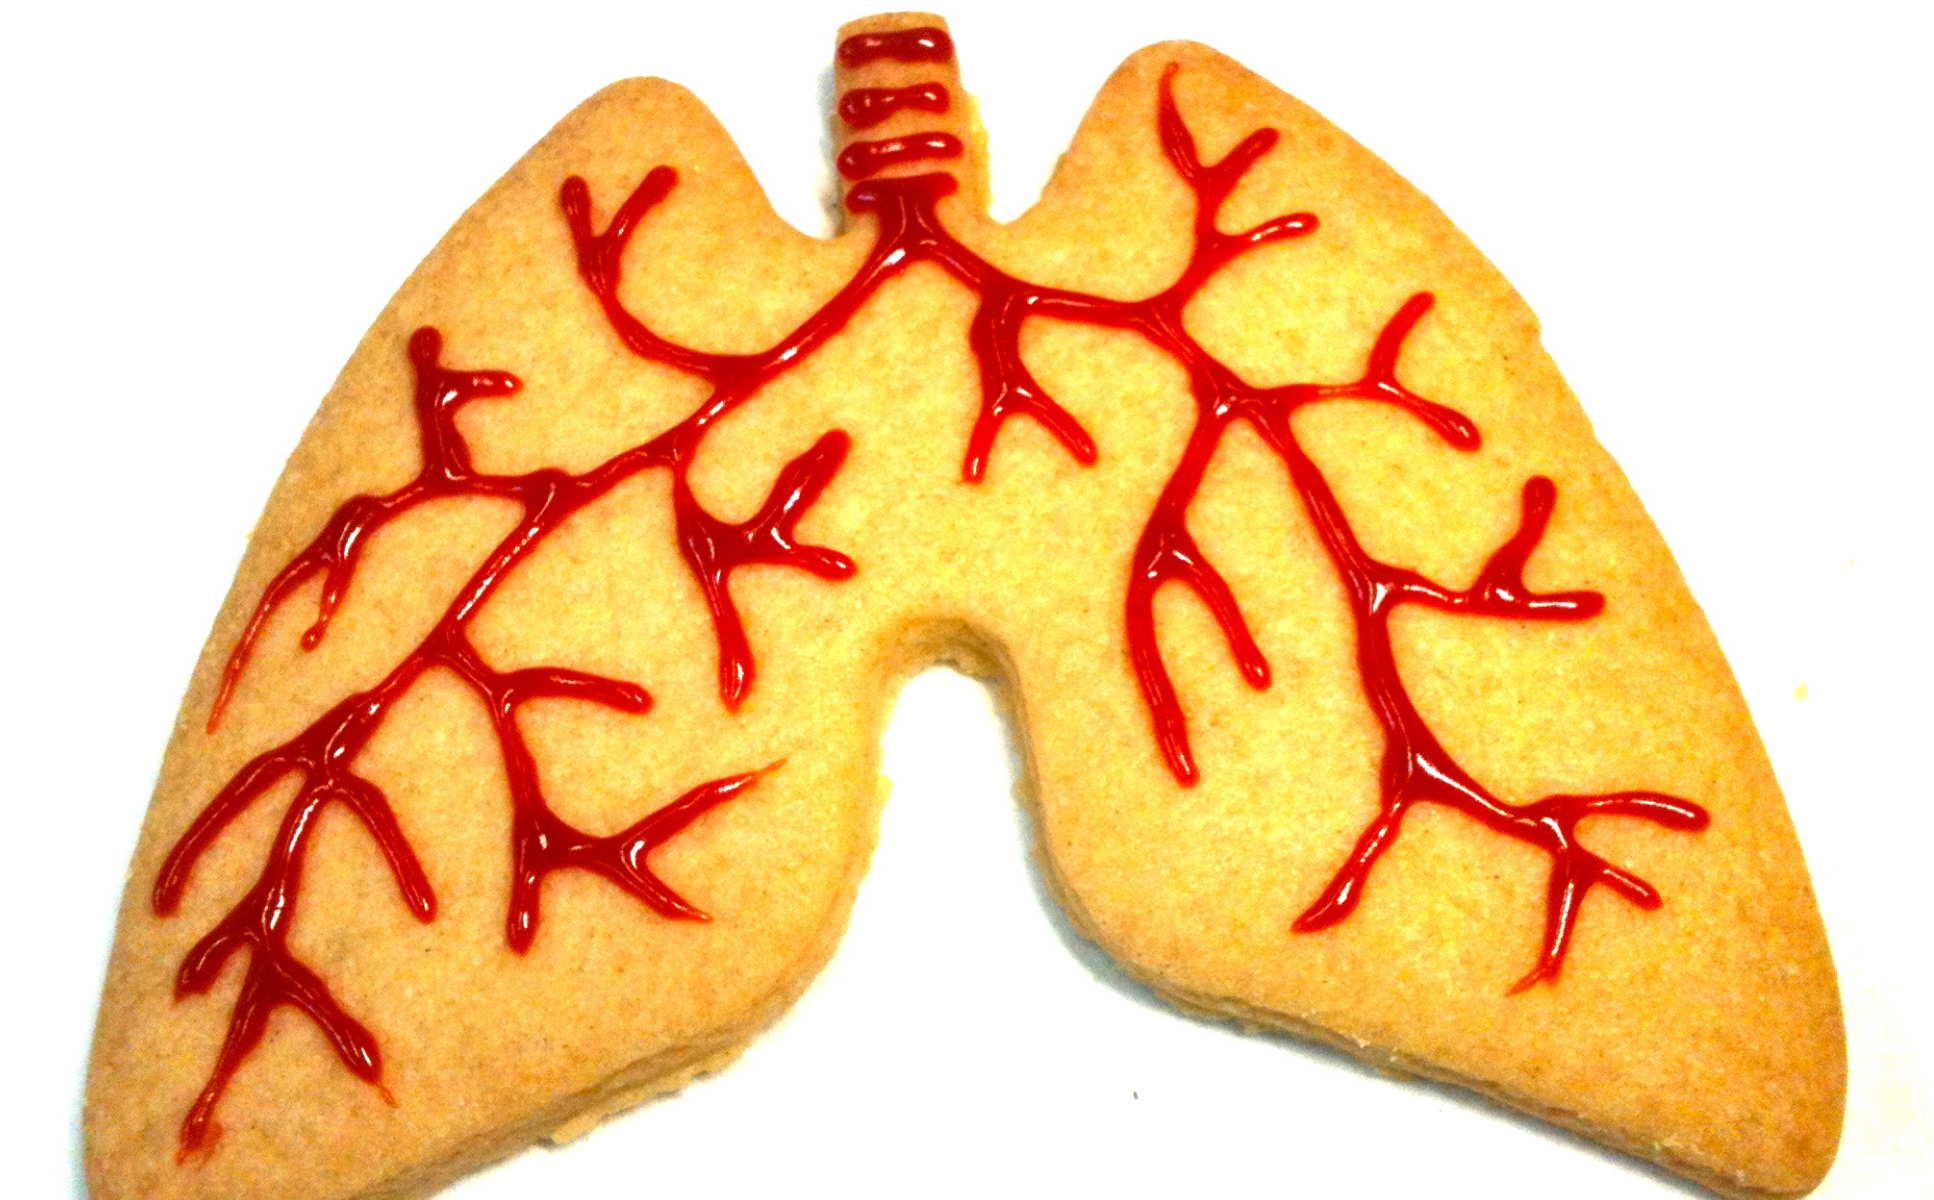 Biscuit in the shape of lungs